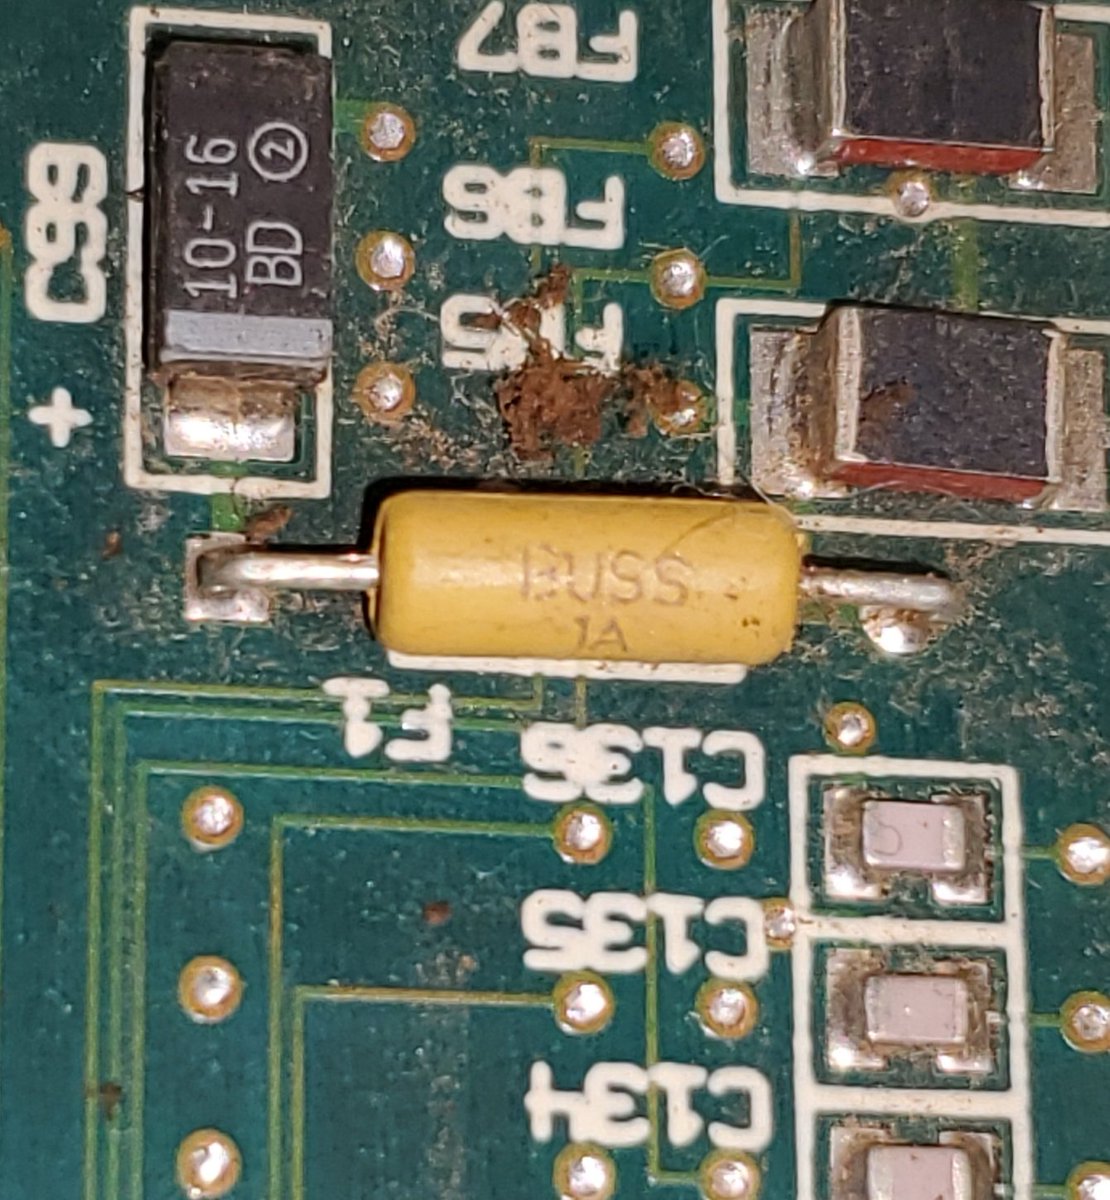 Closeup of the original Tandy 4850 EP keyboard fuse. A tiny, inconspicuous yellow-green cylinder.